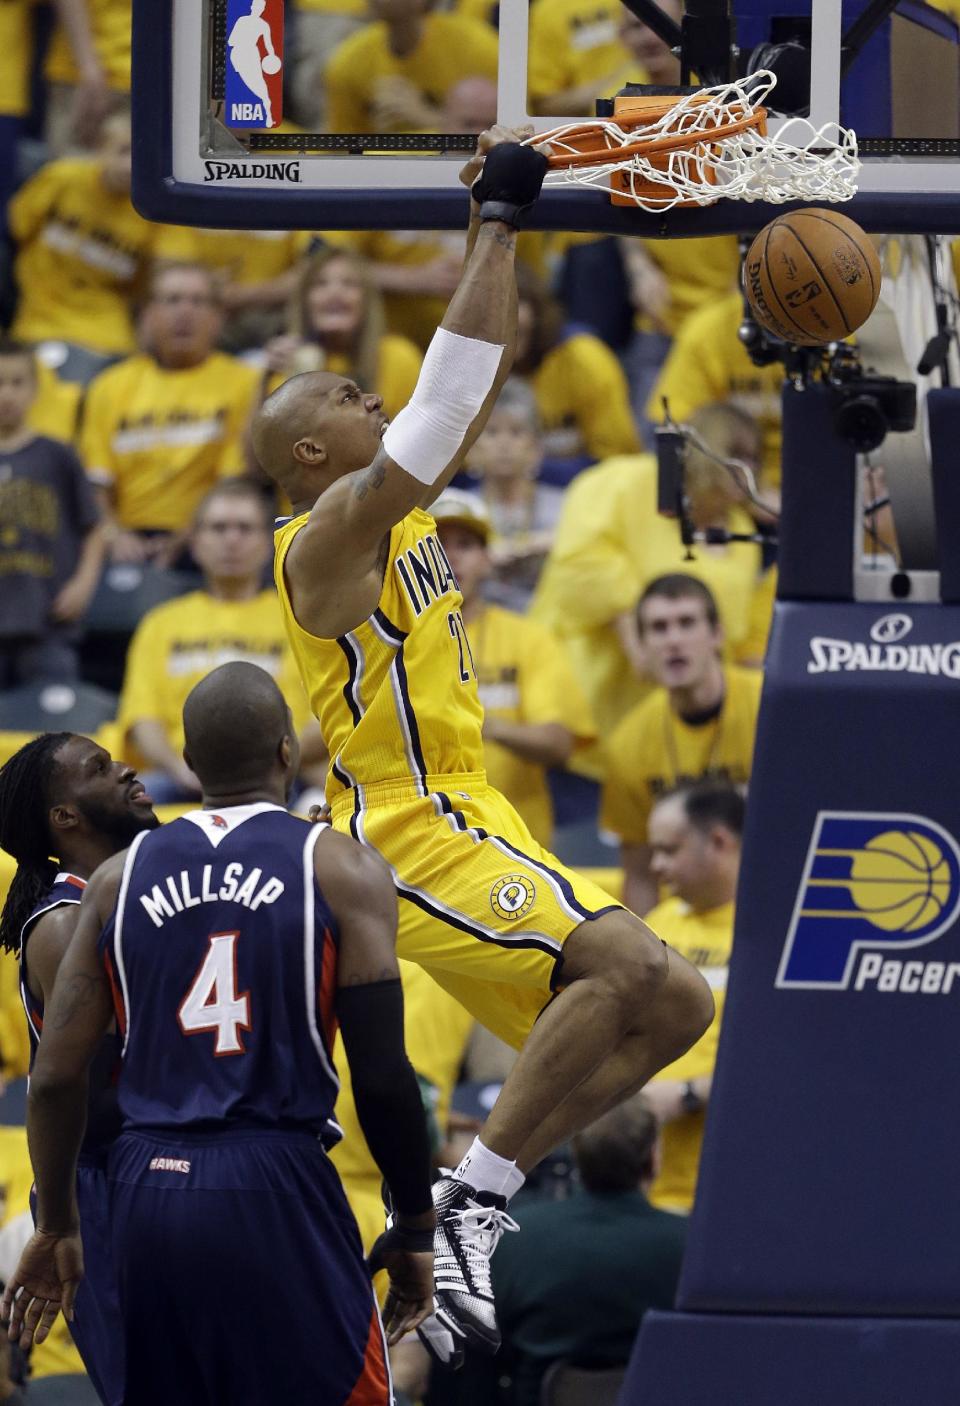 Indiana Pacers' David West (21) dunks against Atlanta Hawks' Paul Millsap (4) during the first half in Game 1 of an opening-round NBA basketball playoff series on Saturday, April 19, 2014, in Indianapolis. (AP Photo/Darron Cummings)